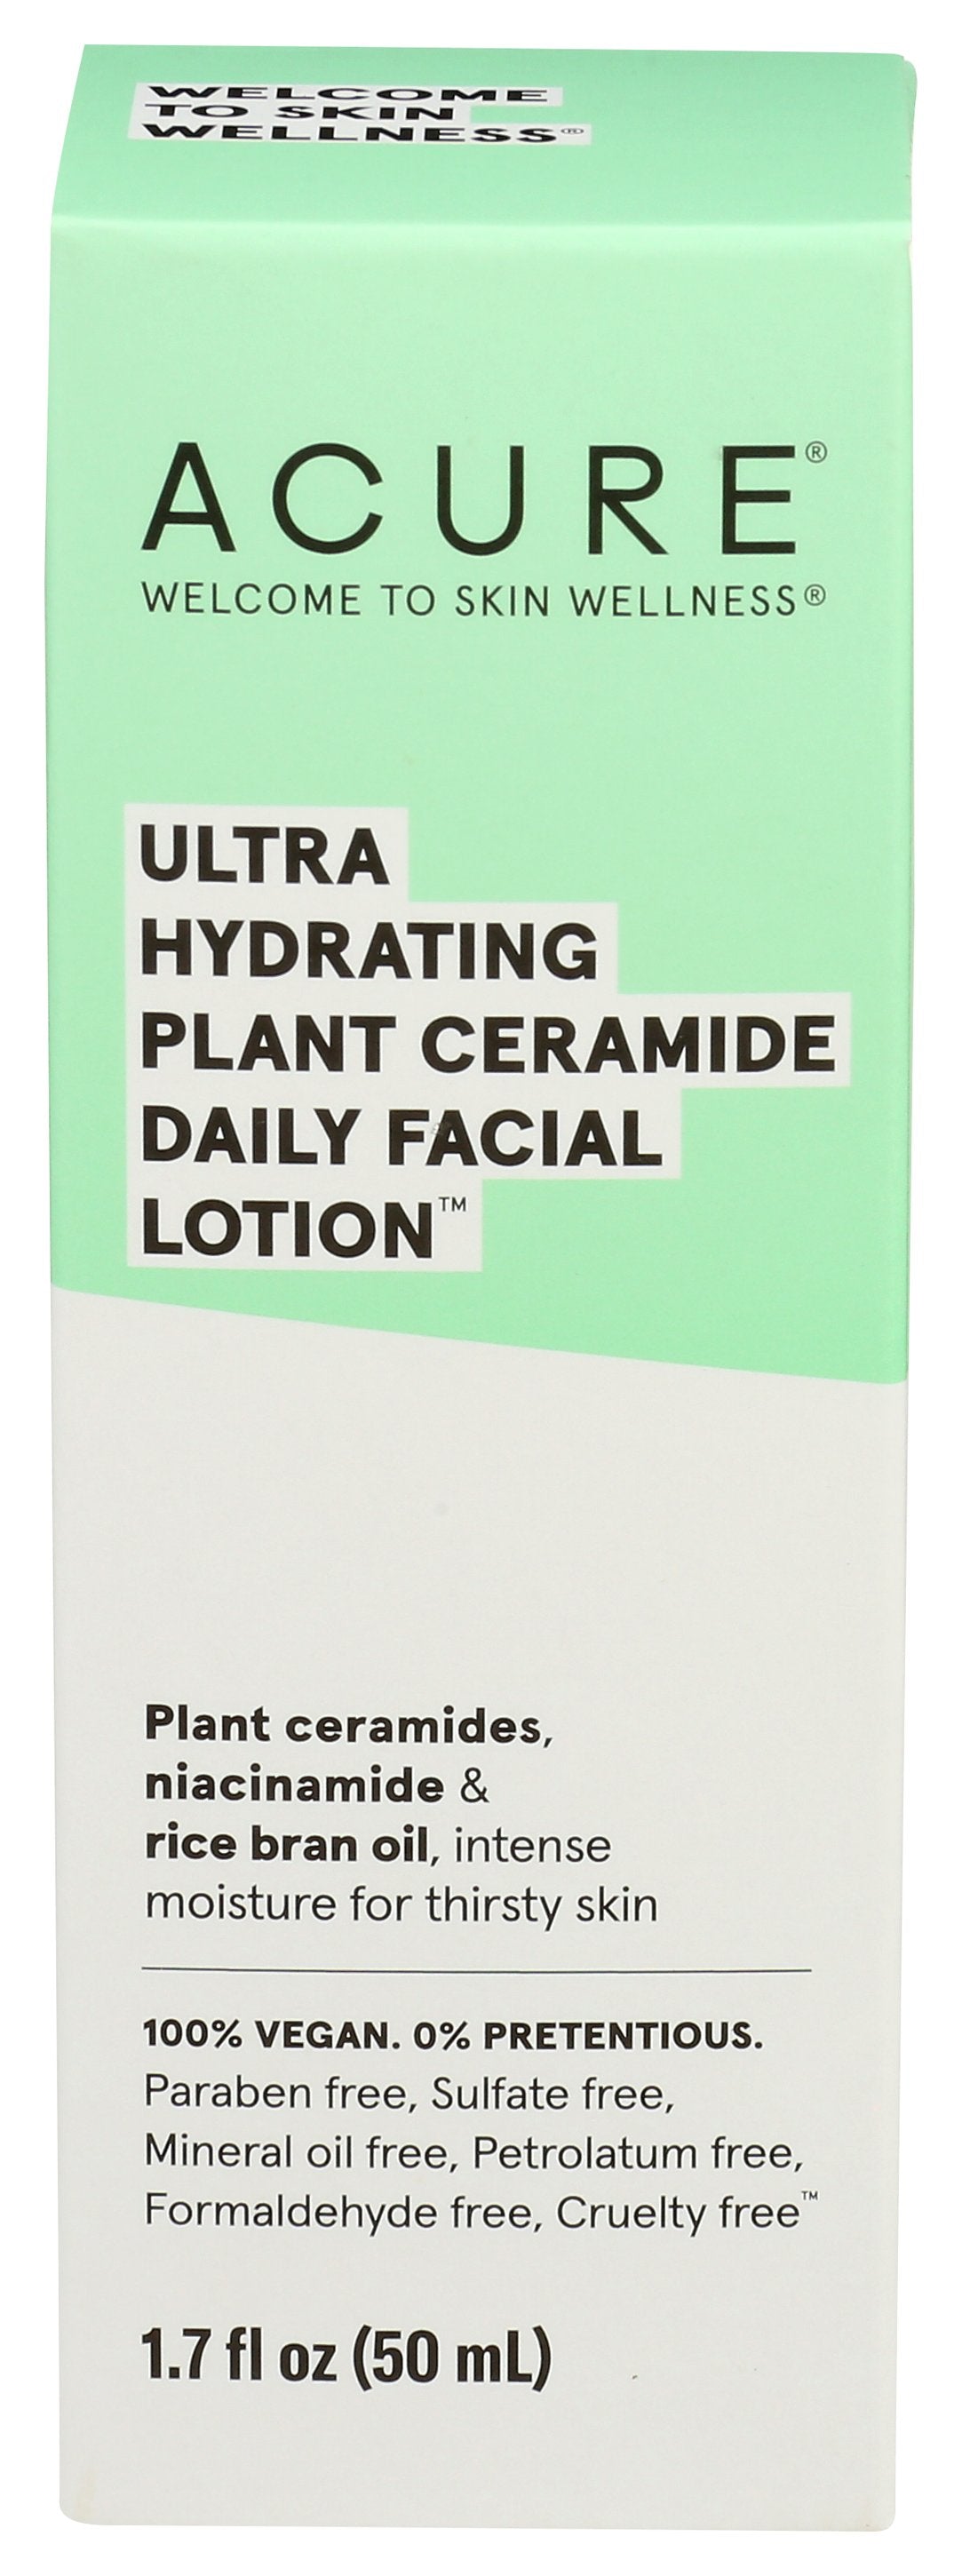 ACURE LOTION FACE PLANT CERAMID